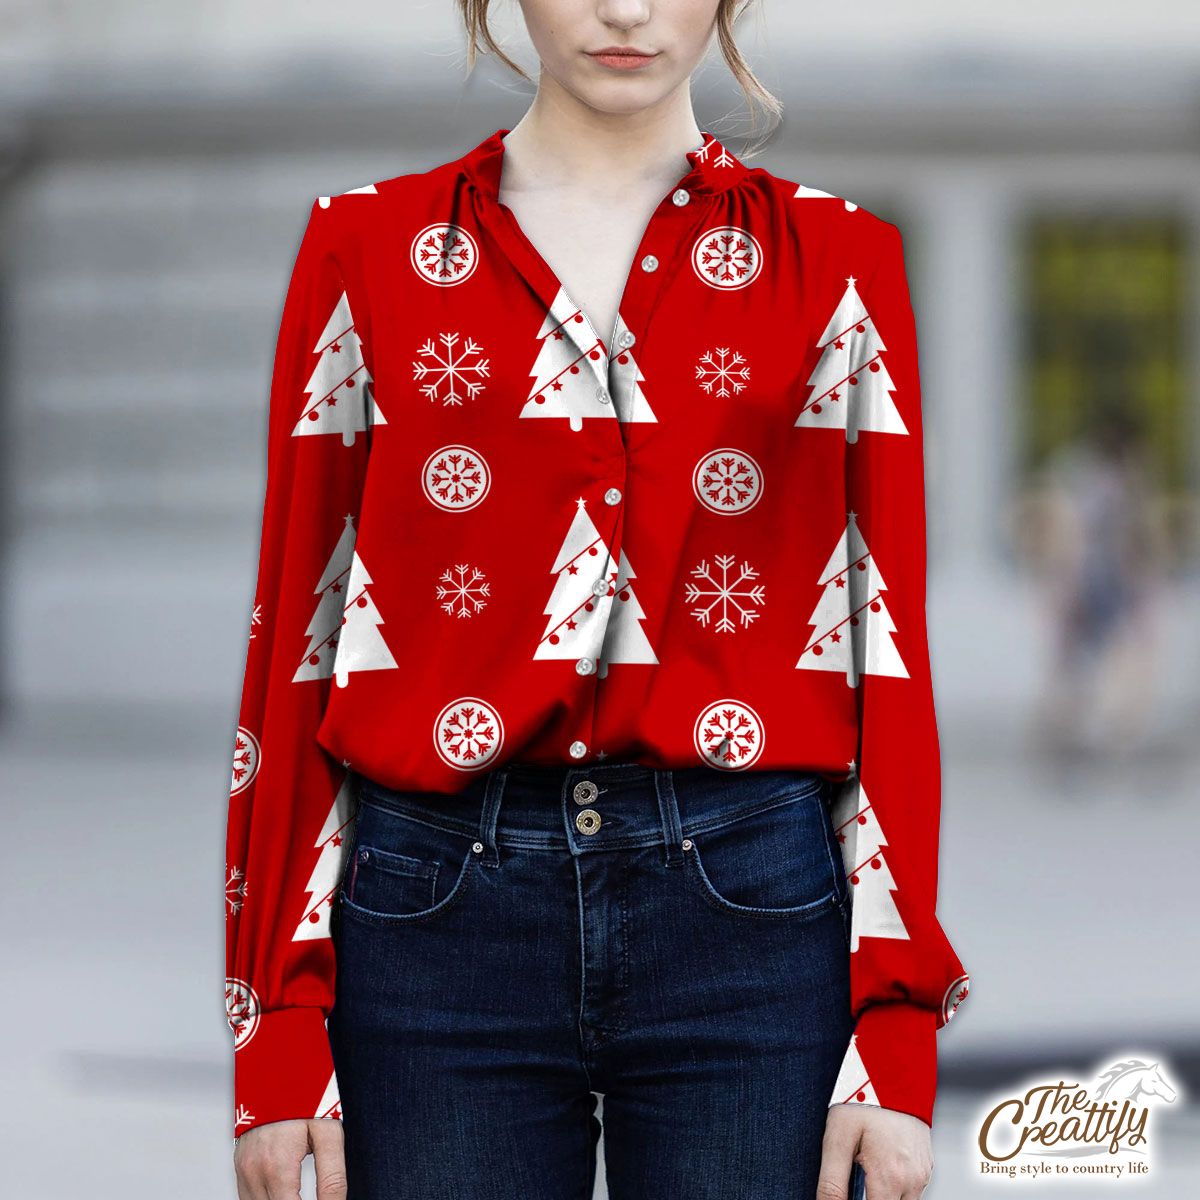 Pine Tree Decorated With Christmas Light And Snowflake Seamless Red Pattern V-Neckline Blouses